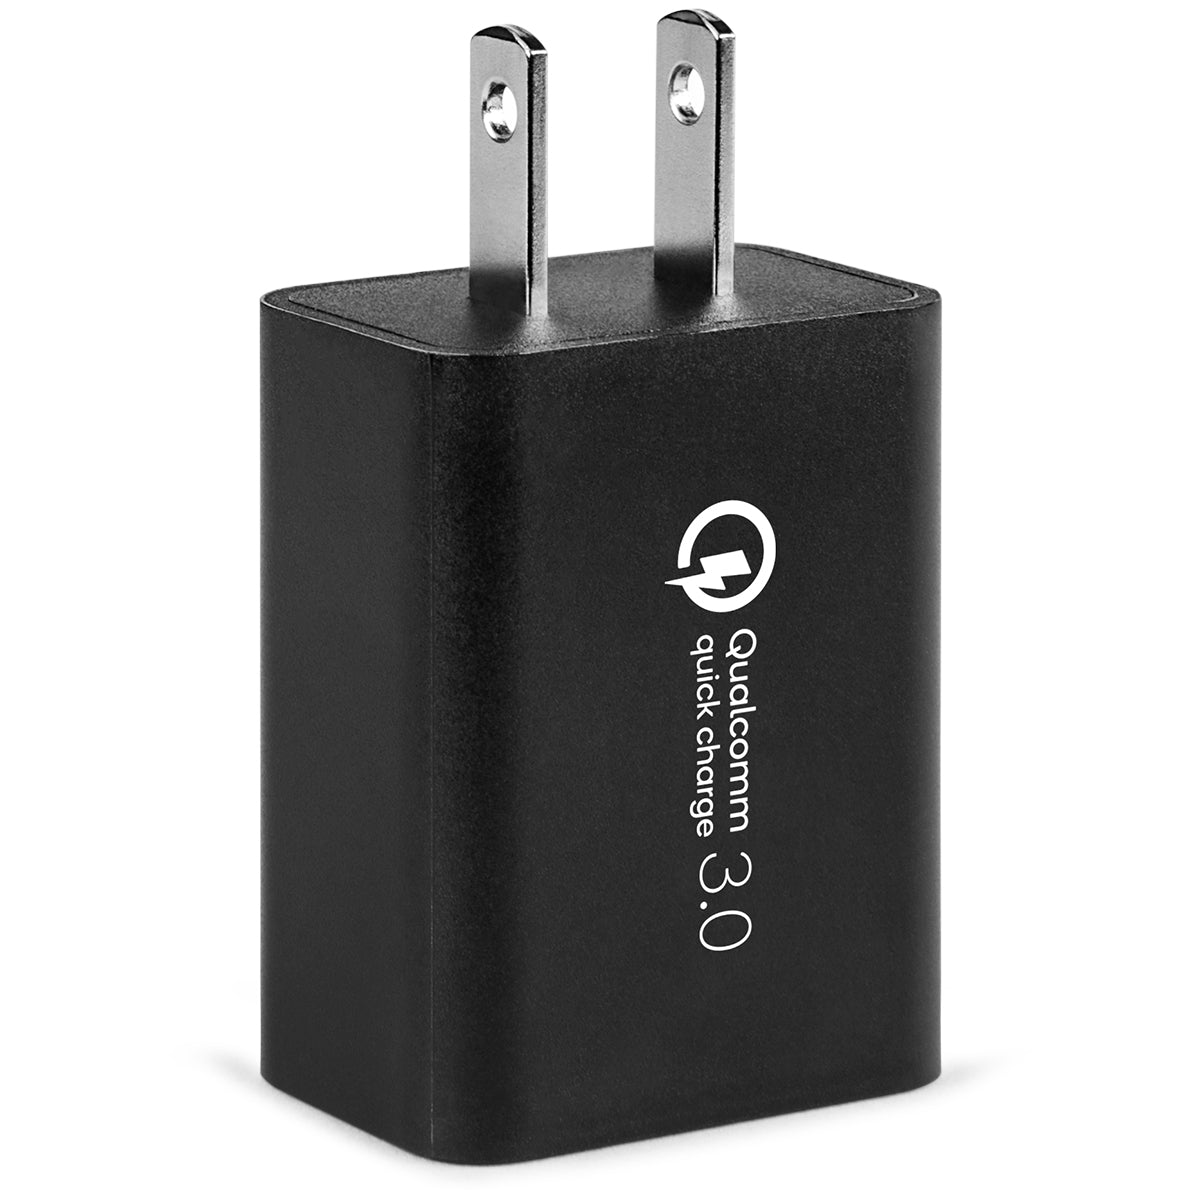 Cellairis Wall Charger - Single Qualcomm Quick Charge USB-A 3.0A Black Wall Chargers